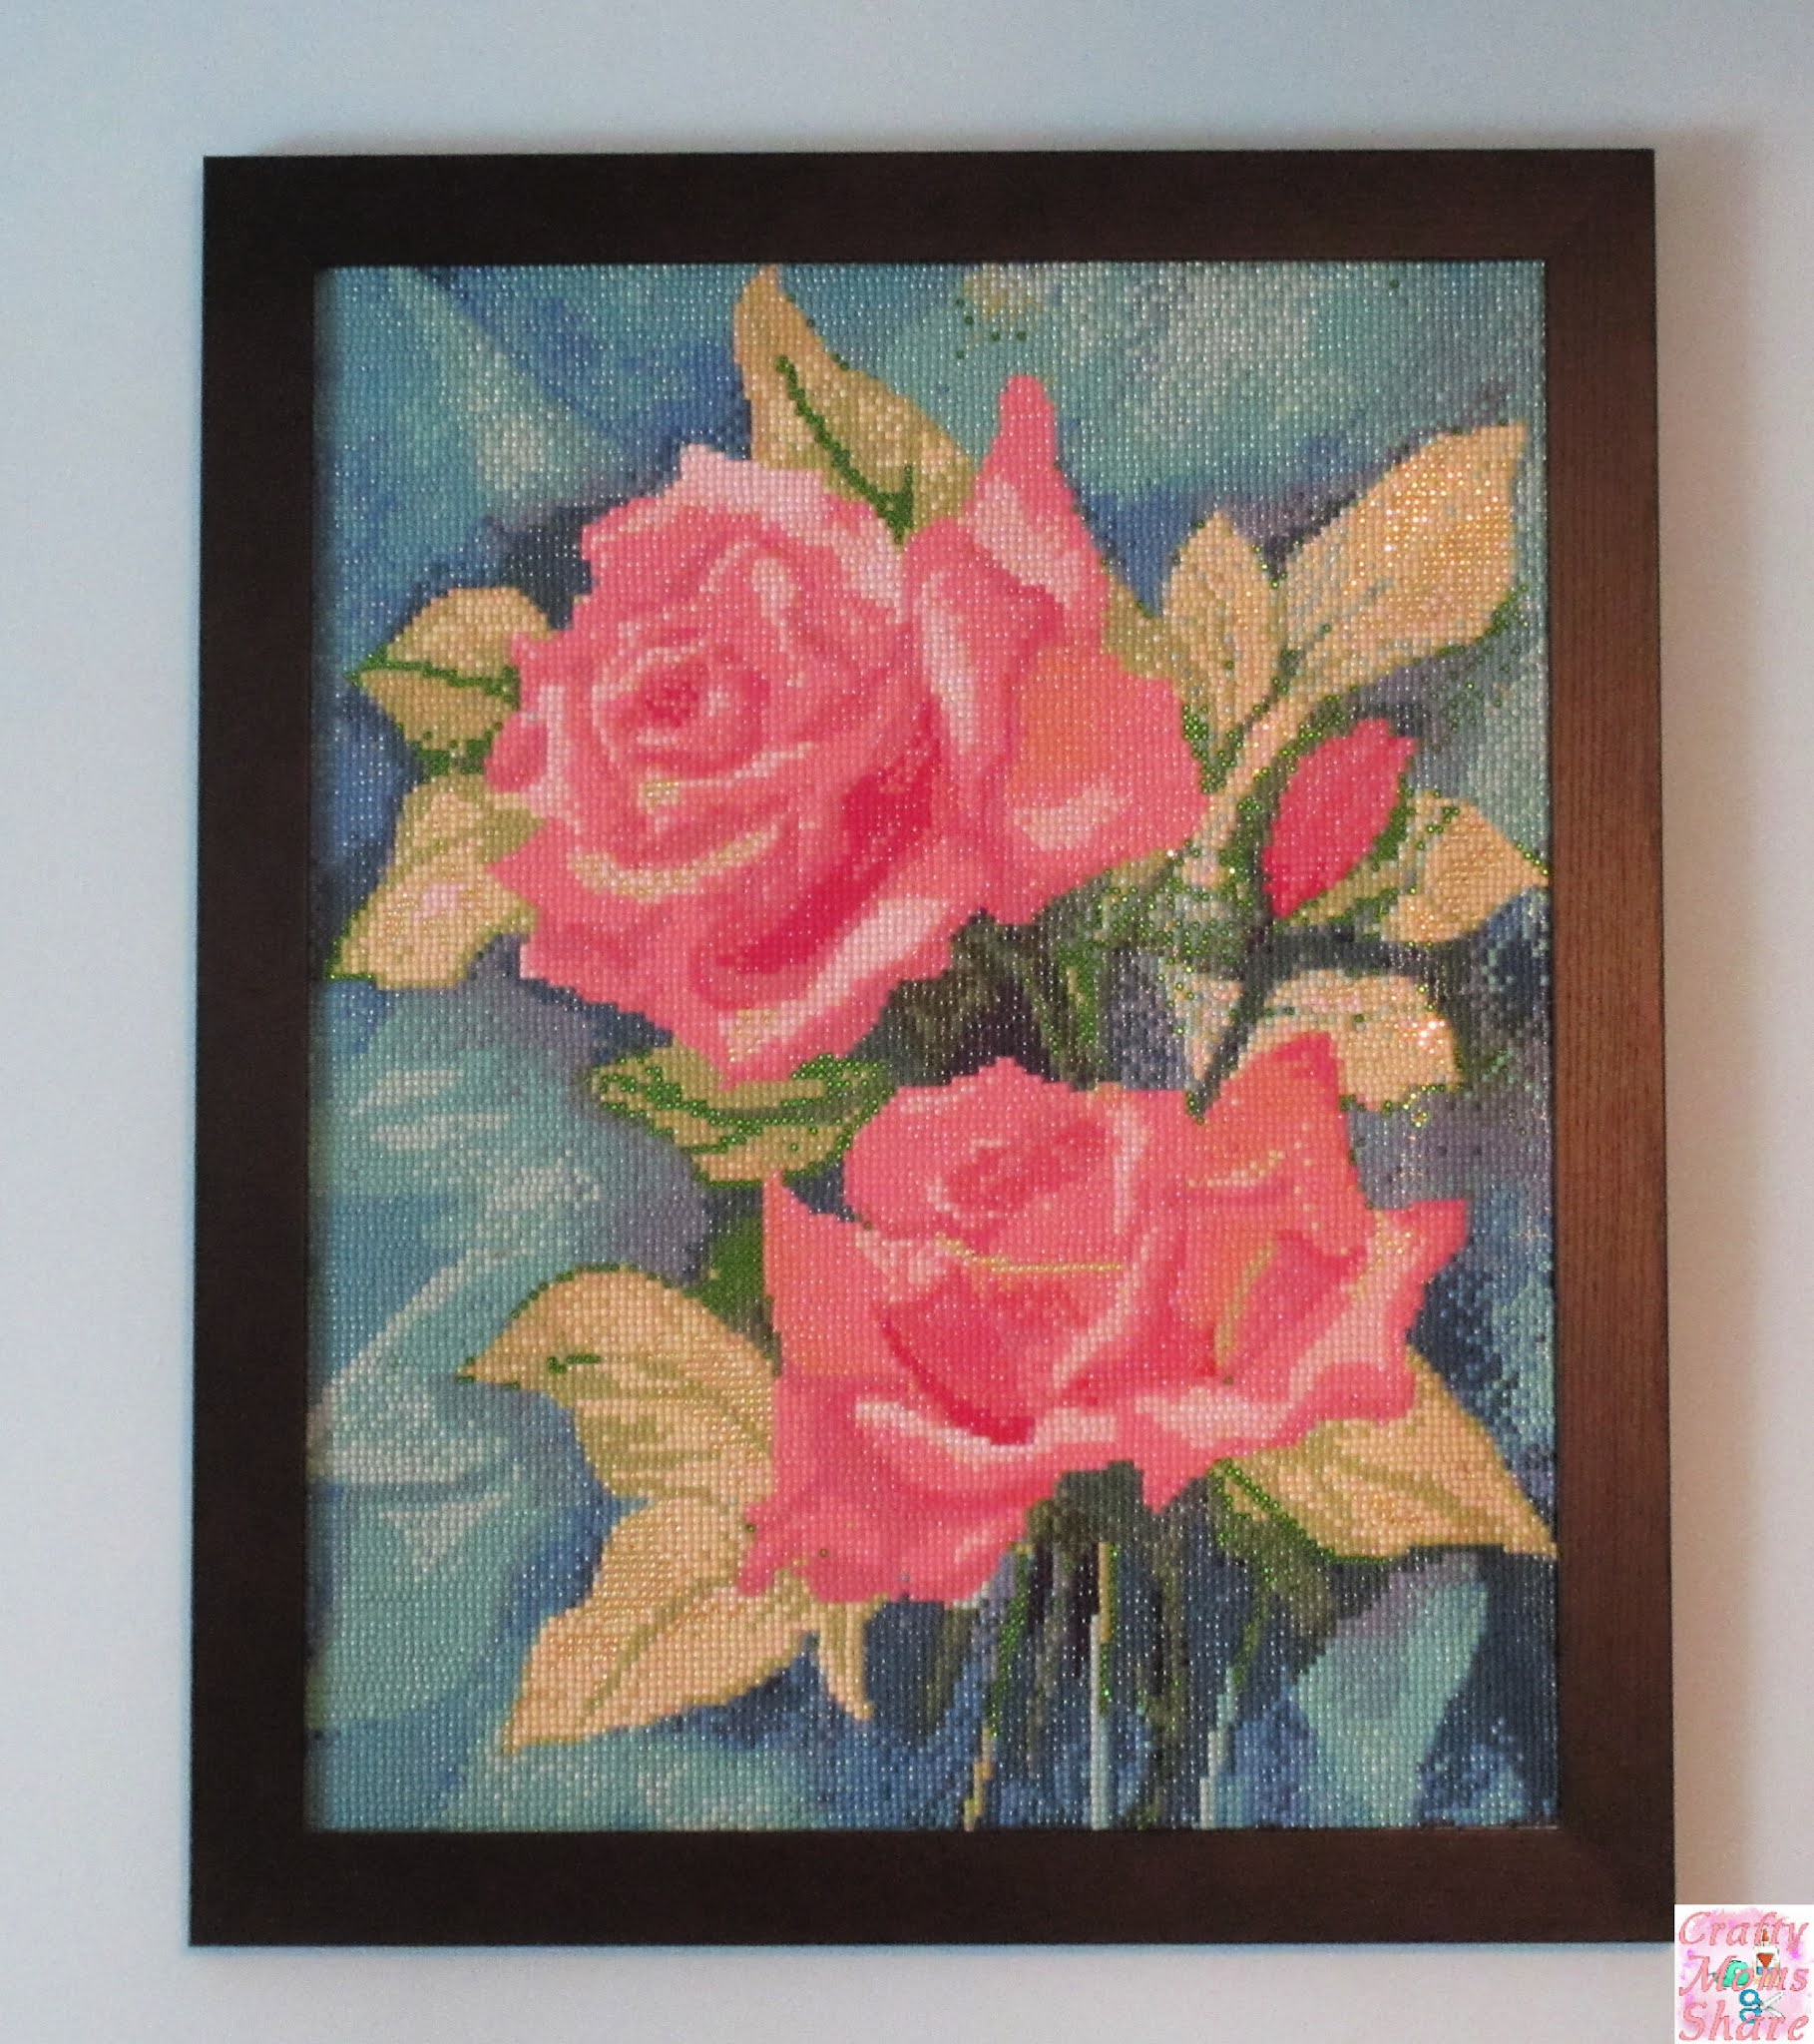 Pink Rose Diamond Painting Kits - Roses on Turquoise– Craft-Ease